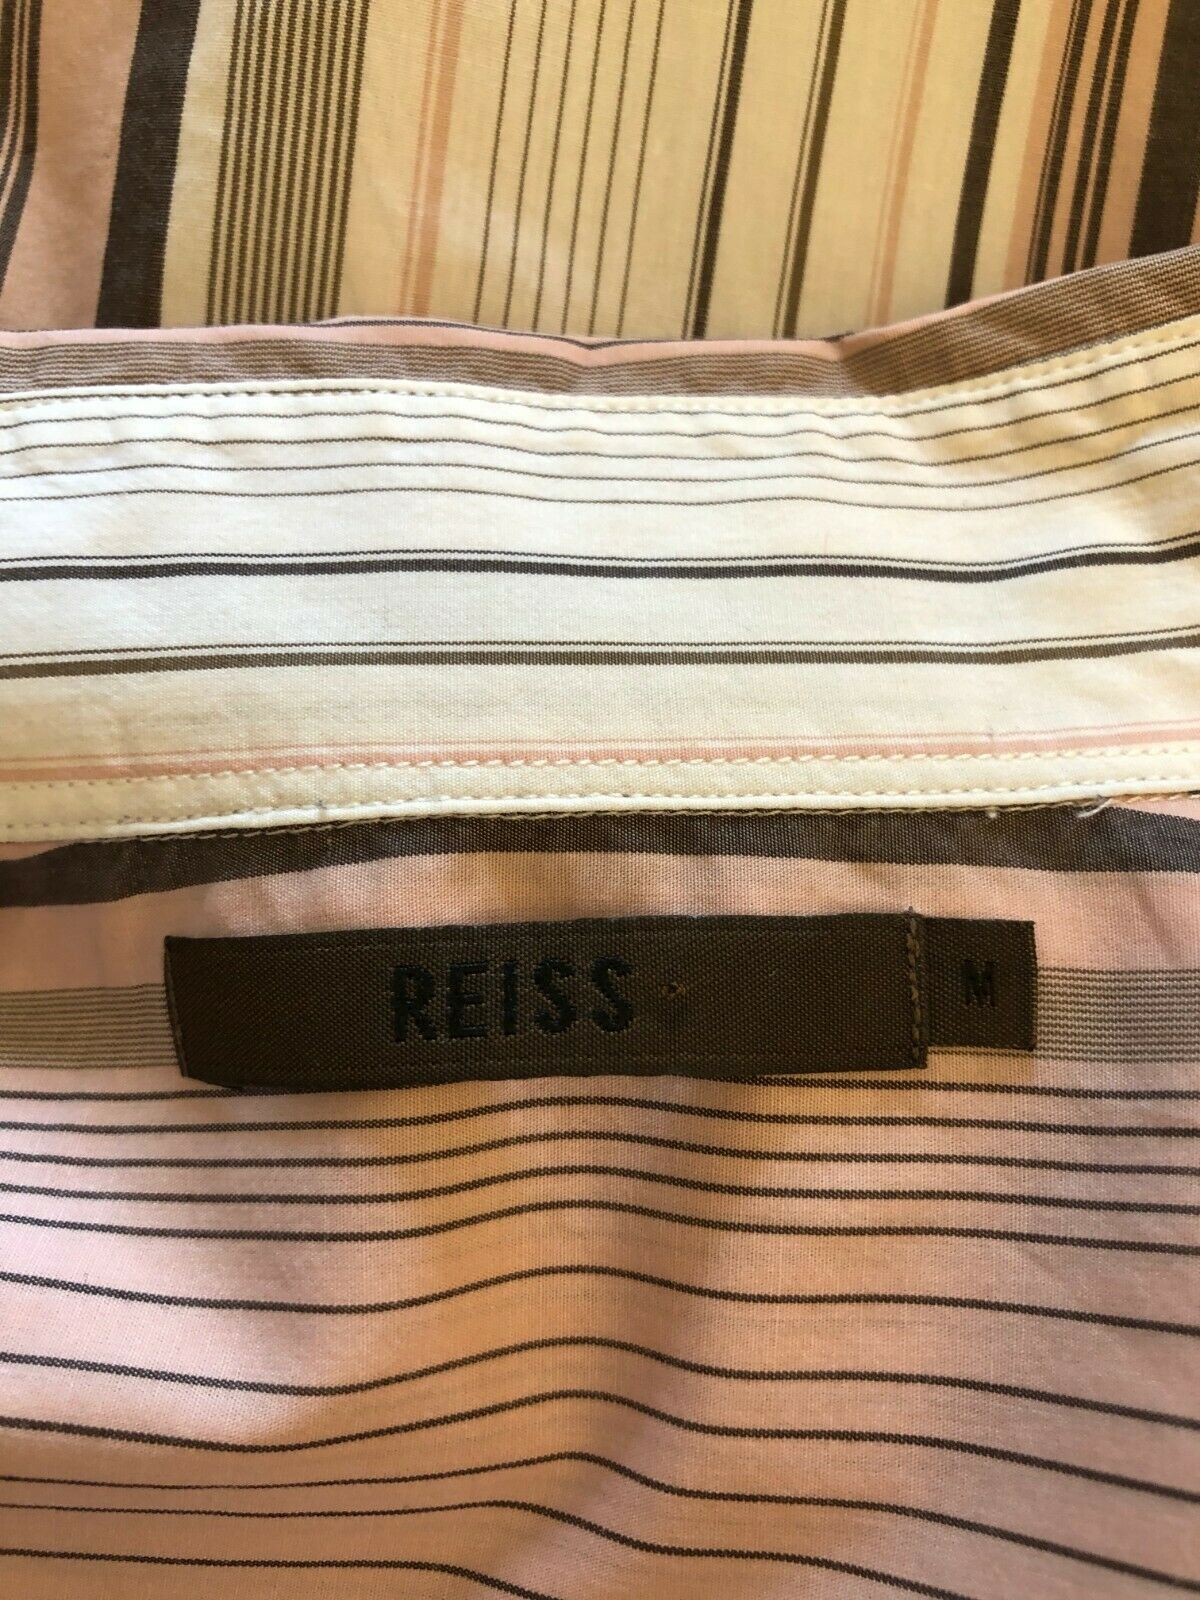 Reiss Men's Pink & White Striped Cotton Formal Shirt, Double Cuffs Size M chest 42" Neck 17" Timeless Fashions